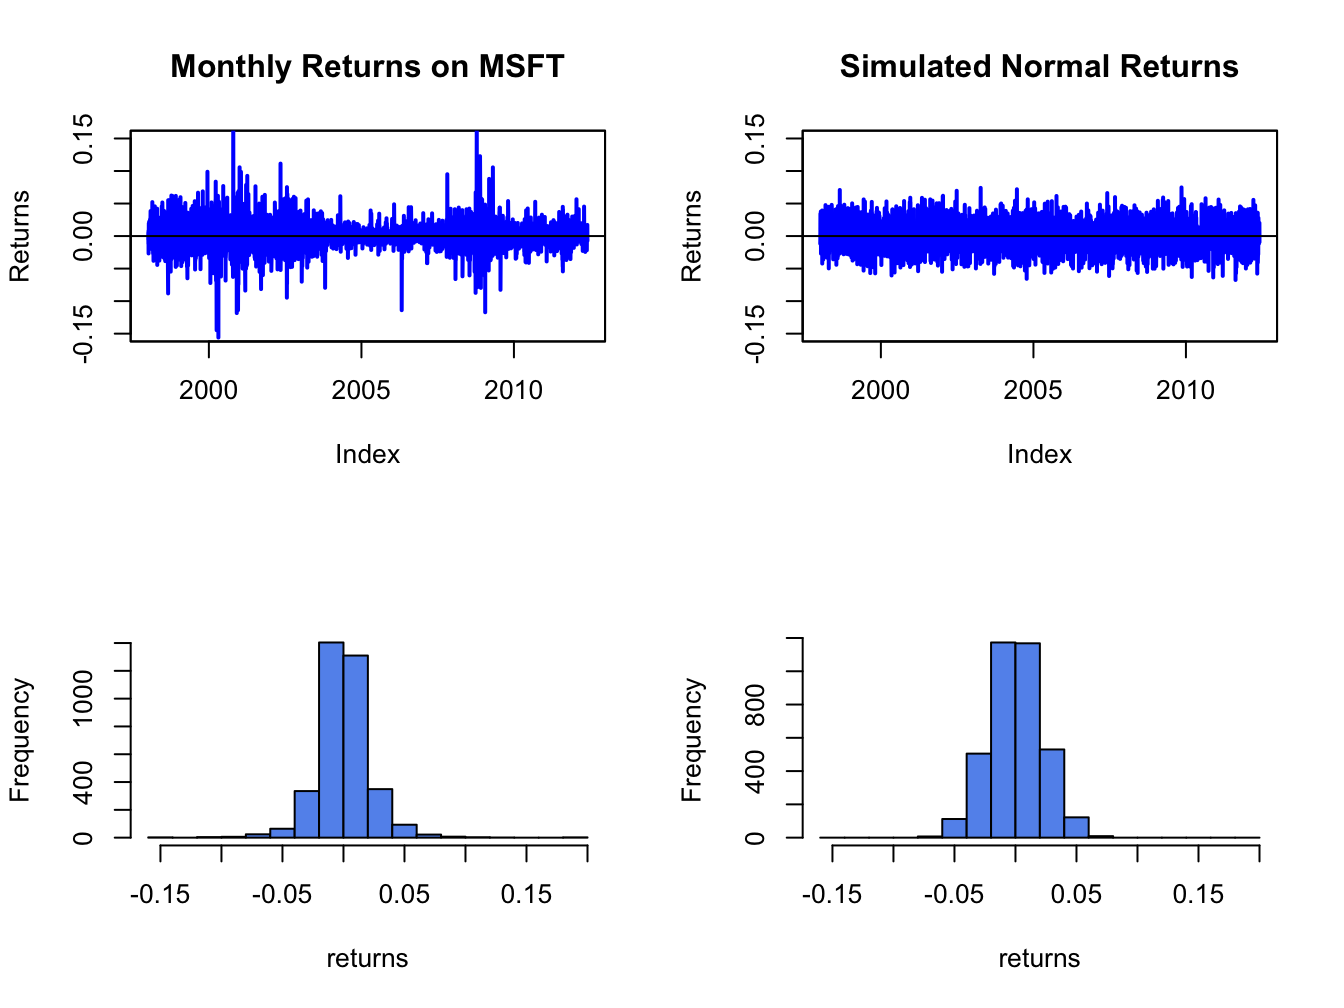 Comparison of Microsoft daily returns with simulated normal returns with the same mean and standard deviation as the Microsoft returns.